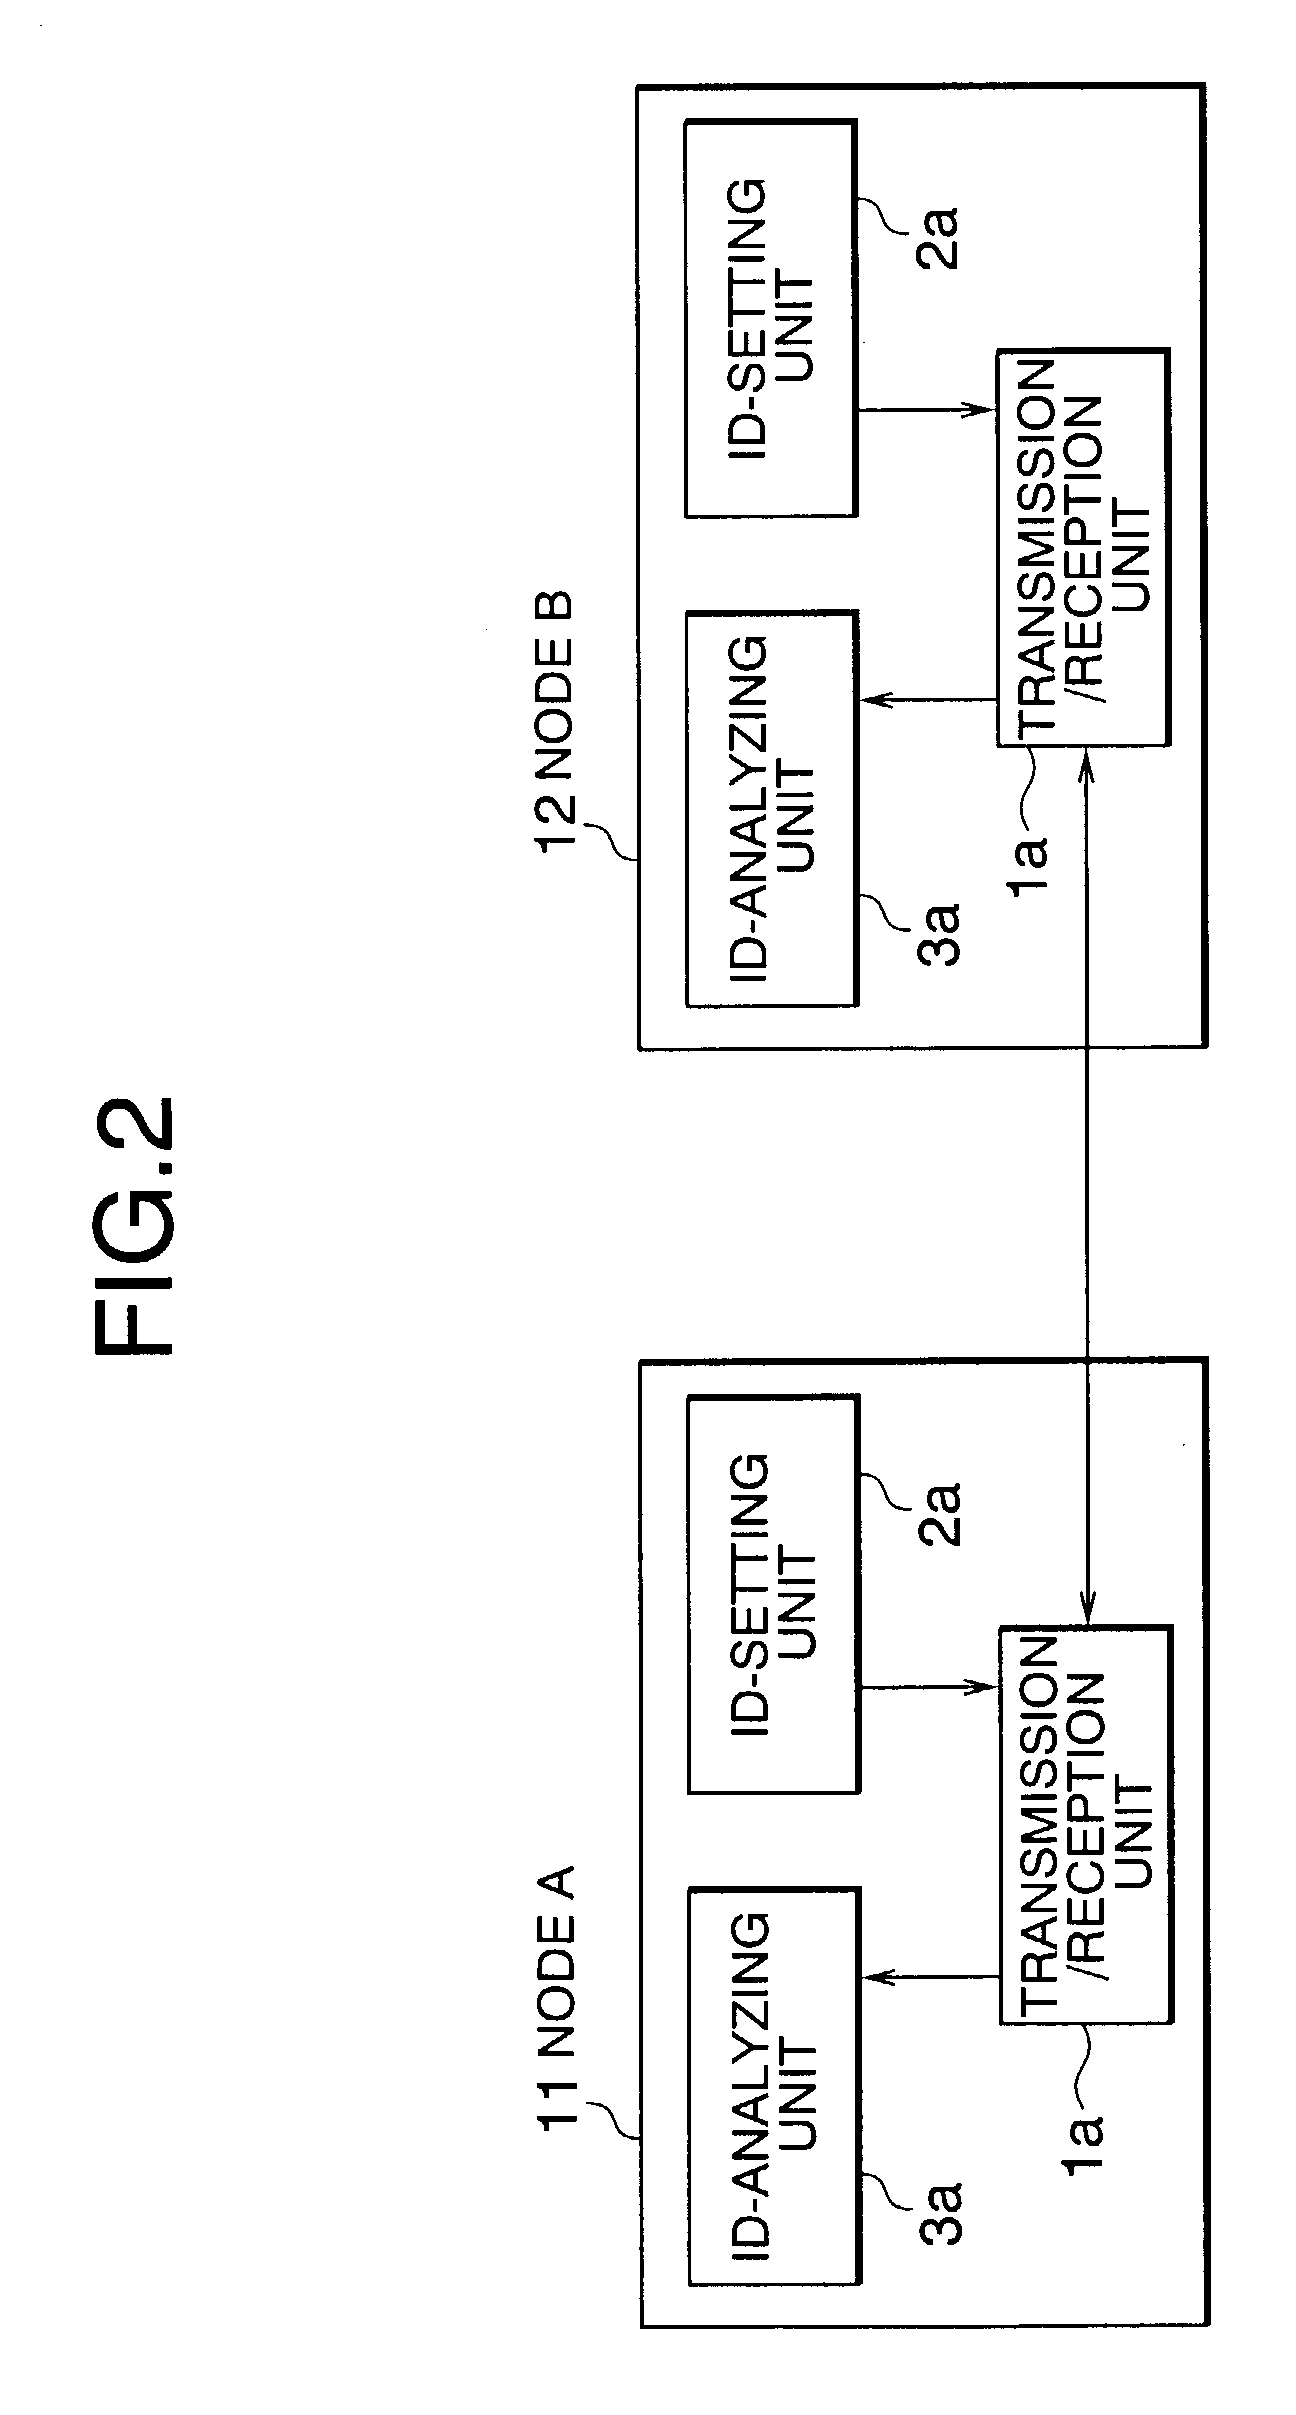 Controller area network (CAN) communication device